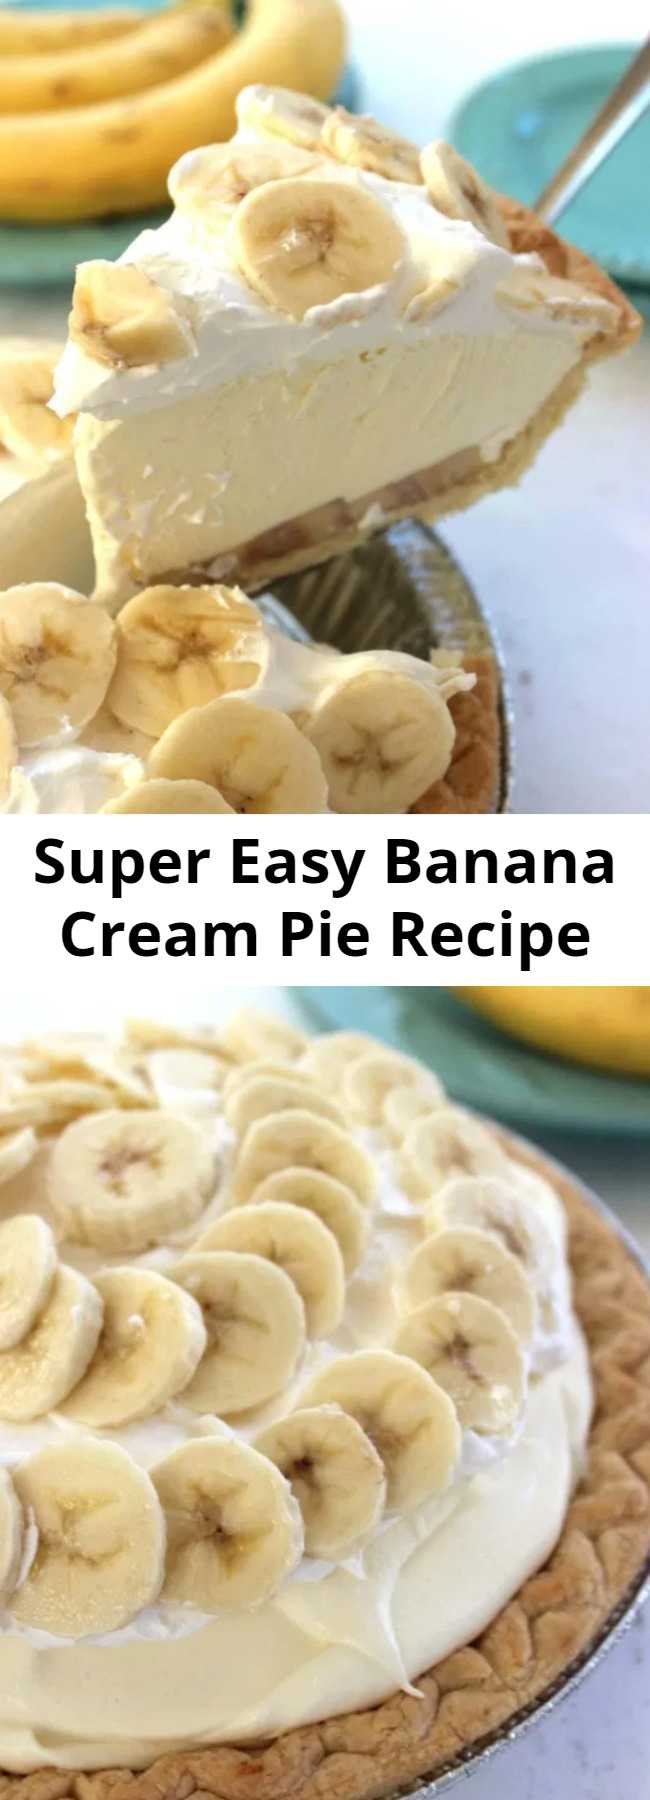 Super Easy Banana Cream Pie Recipe - This Easy Banana Cream Pie is one of my favorite quick and easy desserts. Since we use a store-bought crust and instant banana pudding, it can be made in a jiffy. Simple holiday pie.